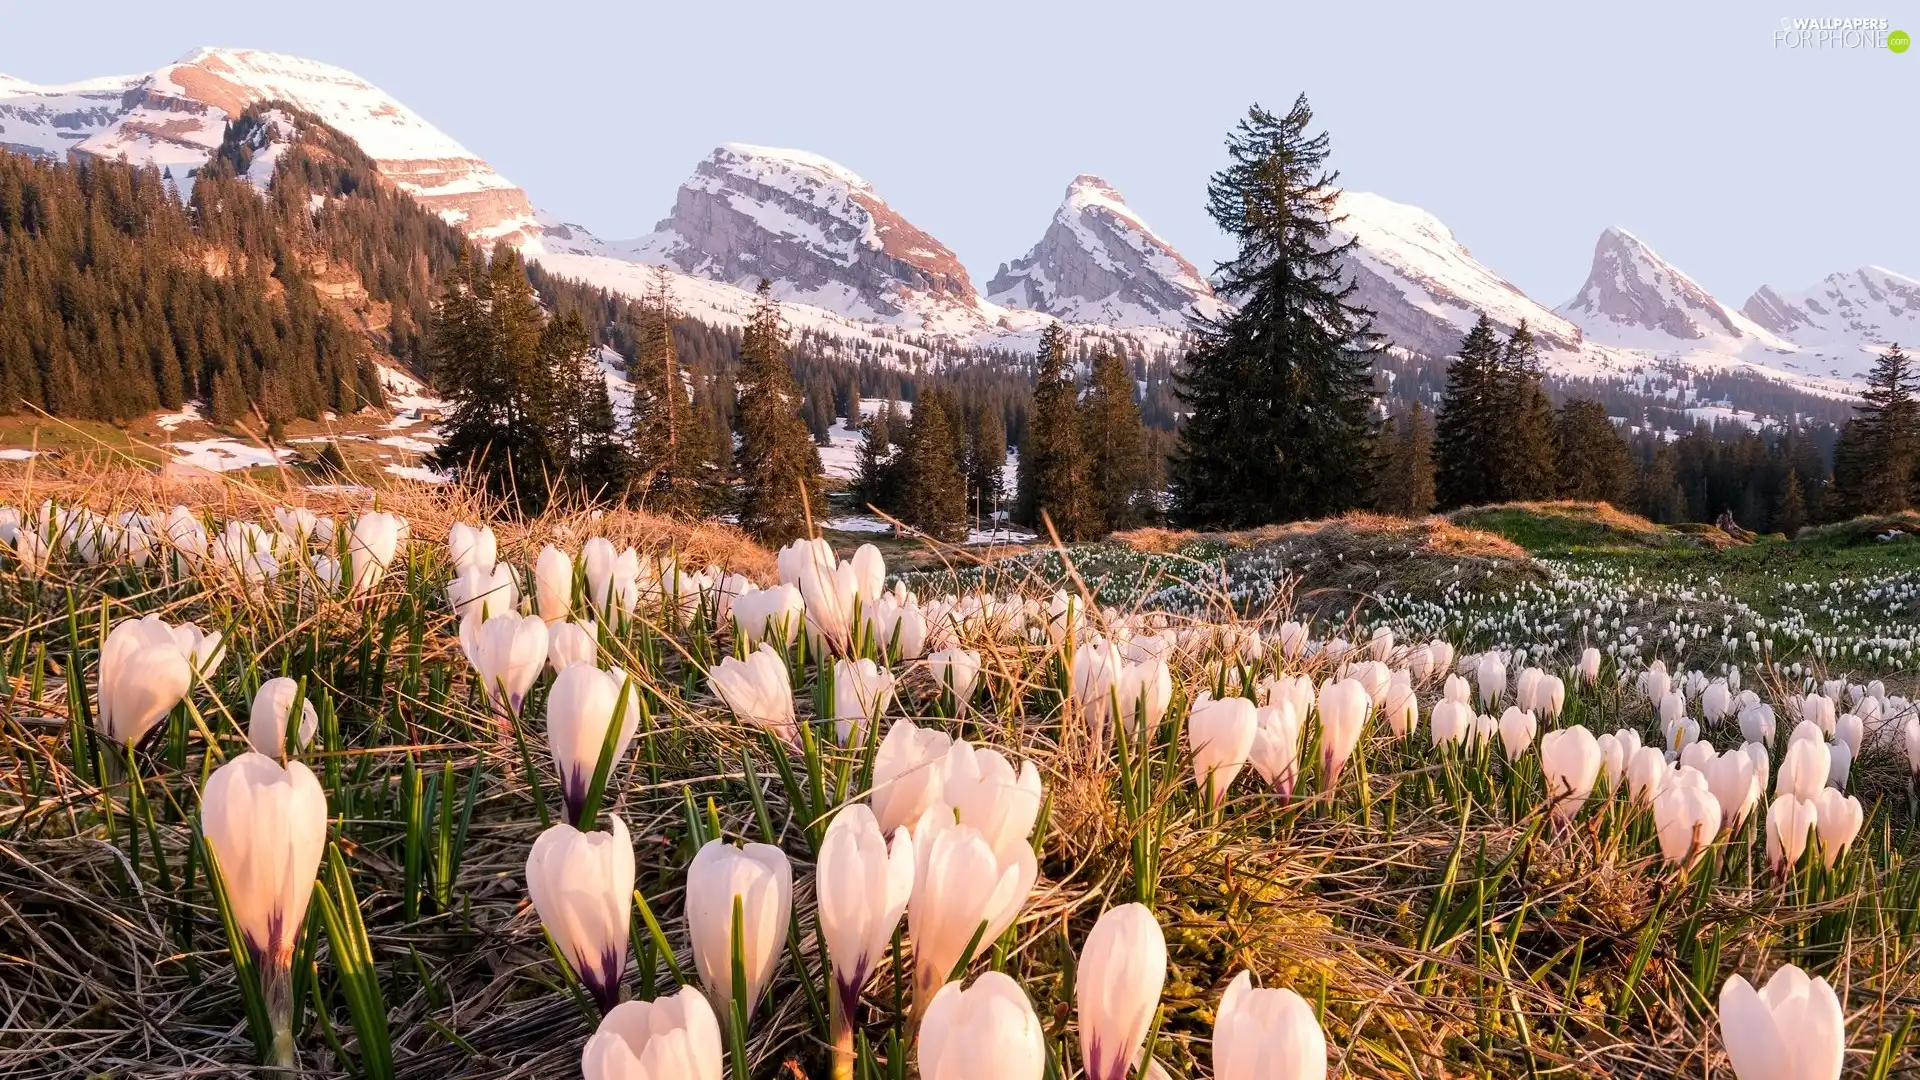 trees, Snowy, White, crocuses, viewes, Mountains